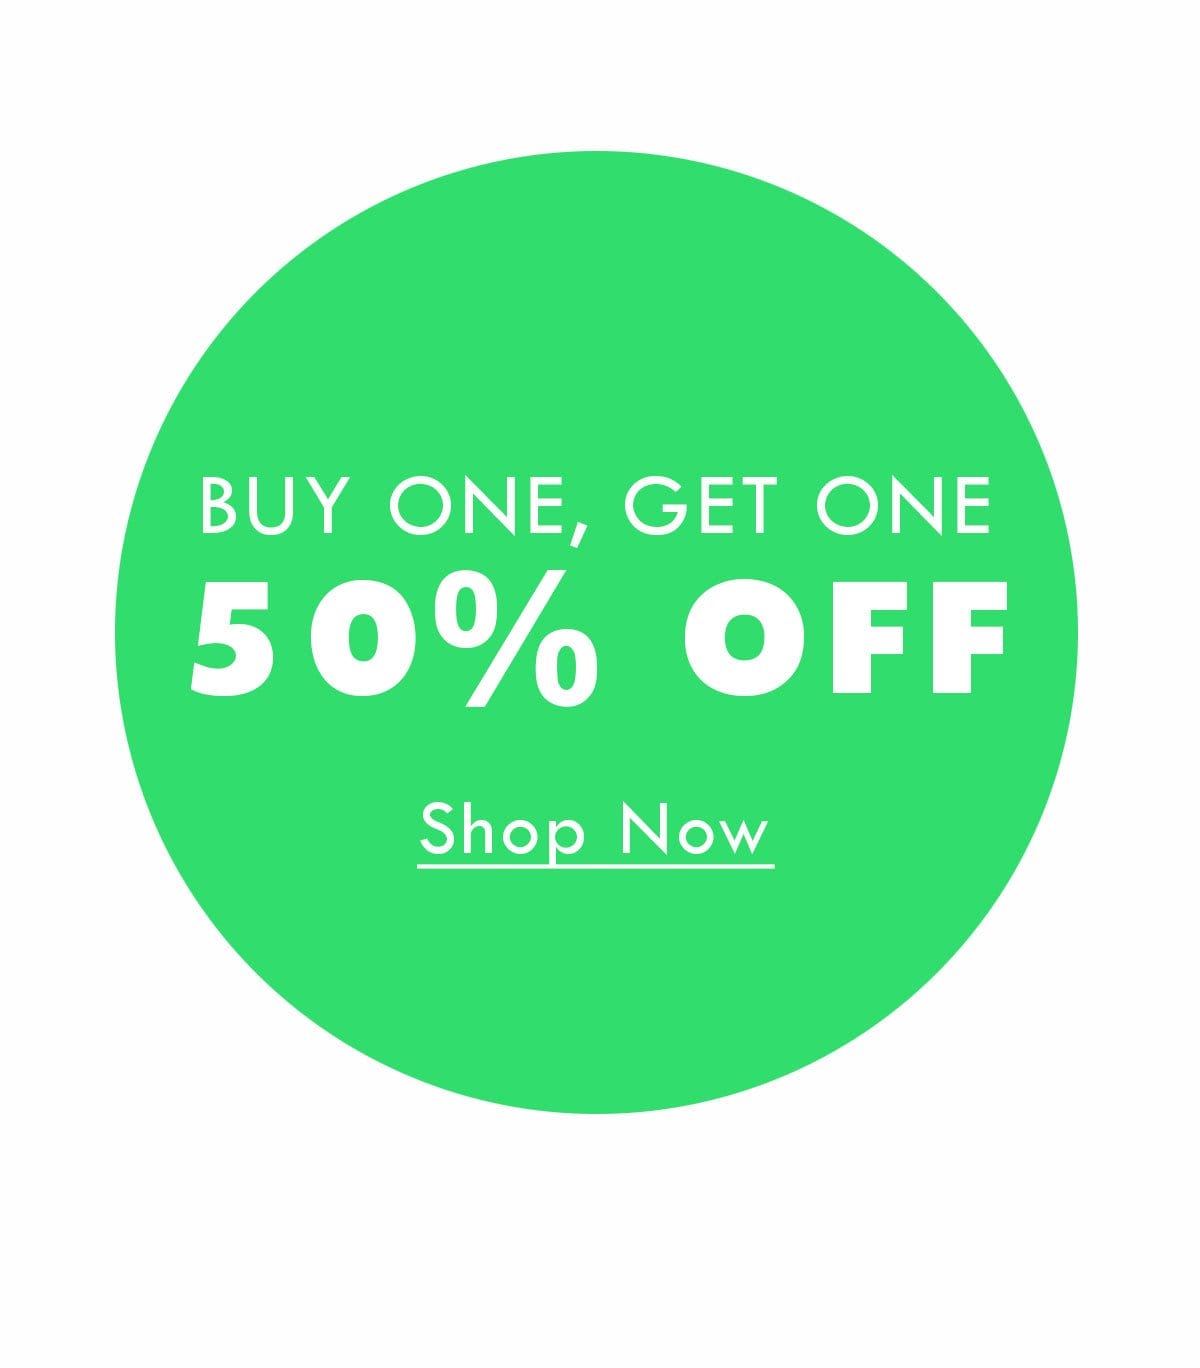 Buy One, Get One 50% OFF - Shop Now